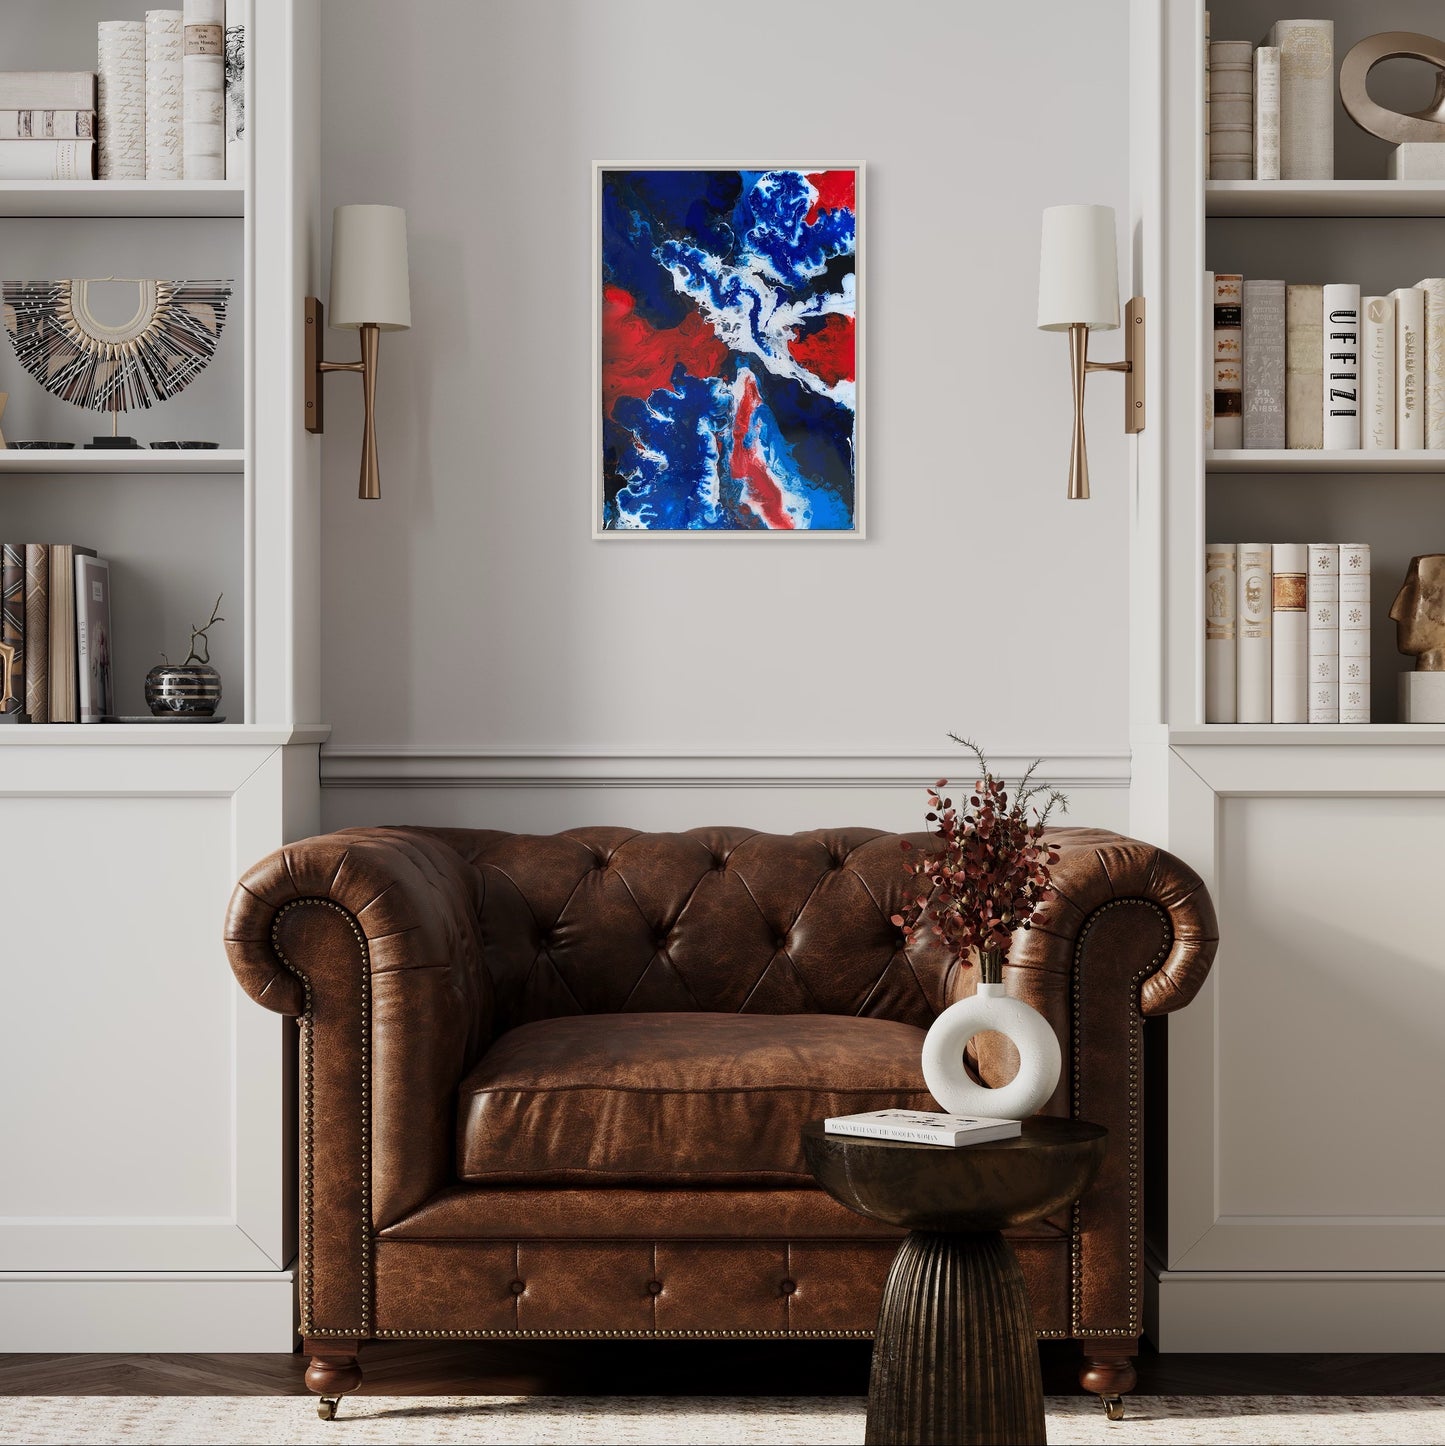 Union Jack British Flag Painting in a traditional british home interior london flat living room